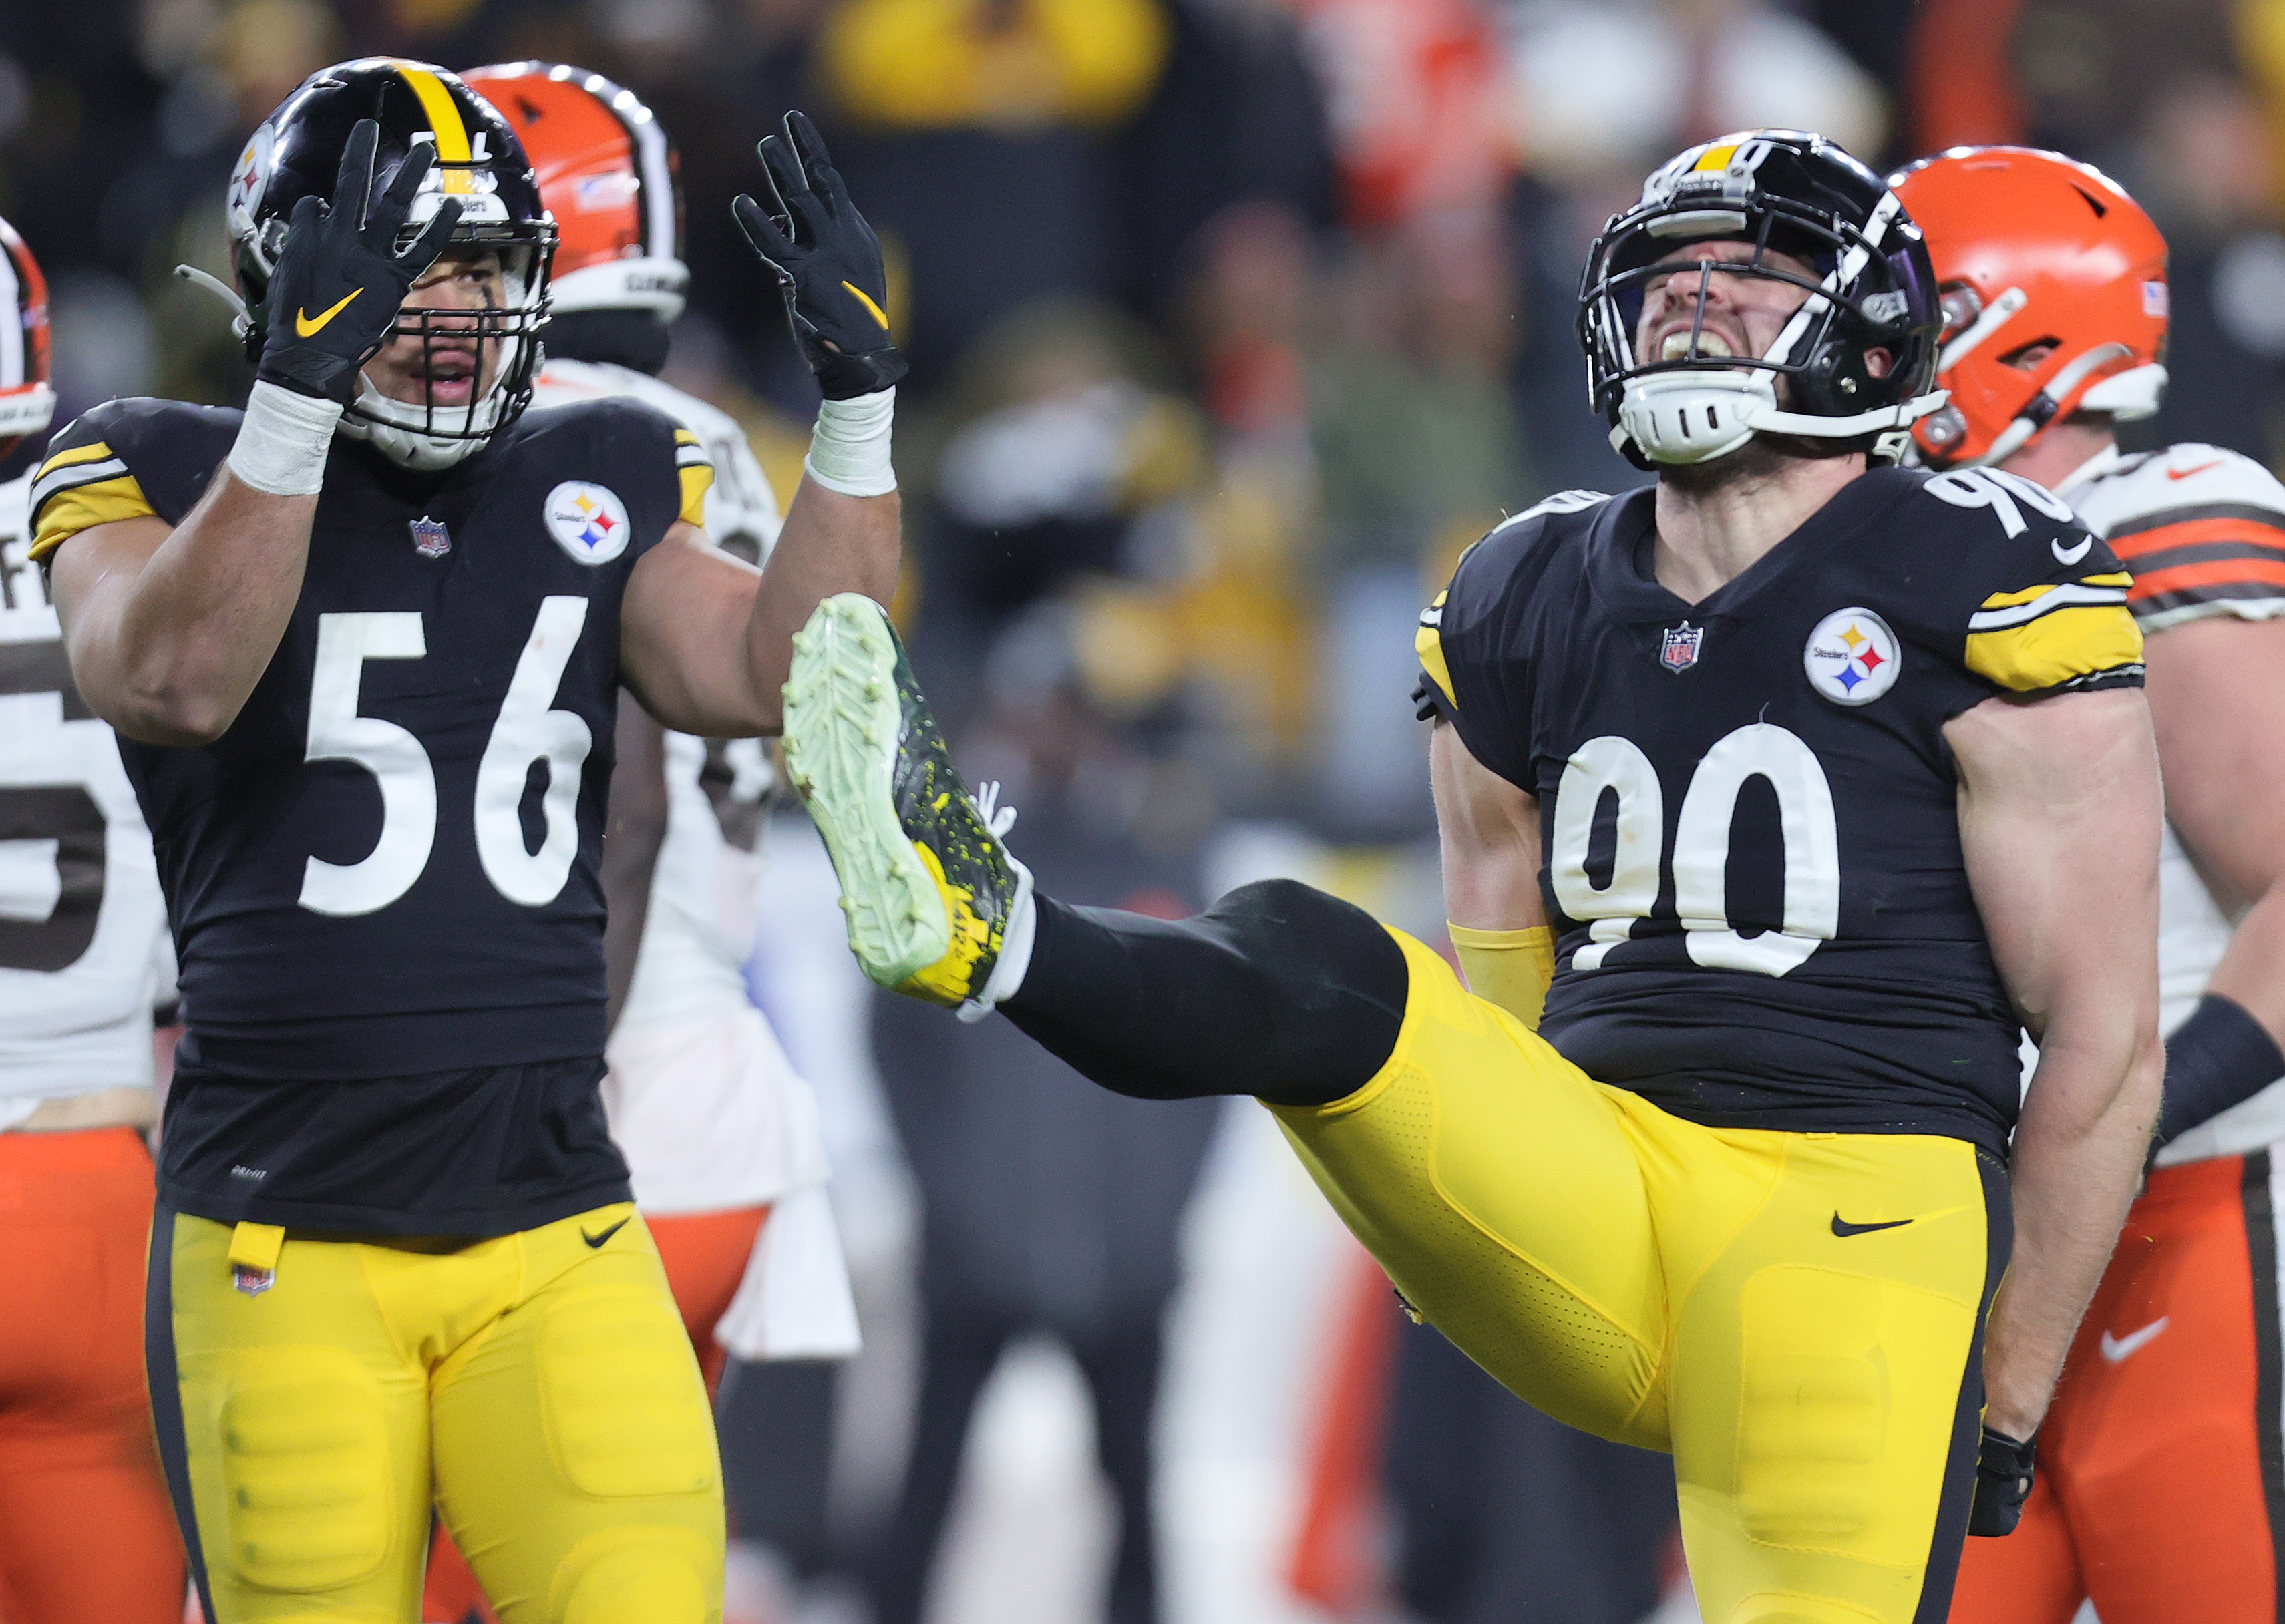 Steelers EDGE T.J. Watt gets disrespected by EA in Madden rating